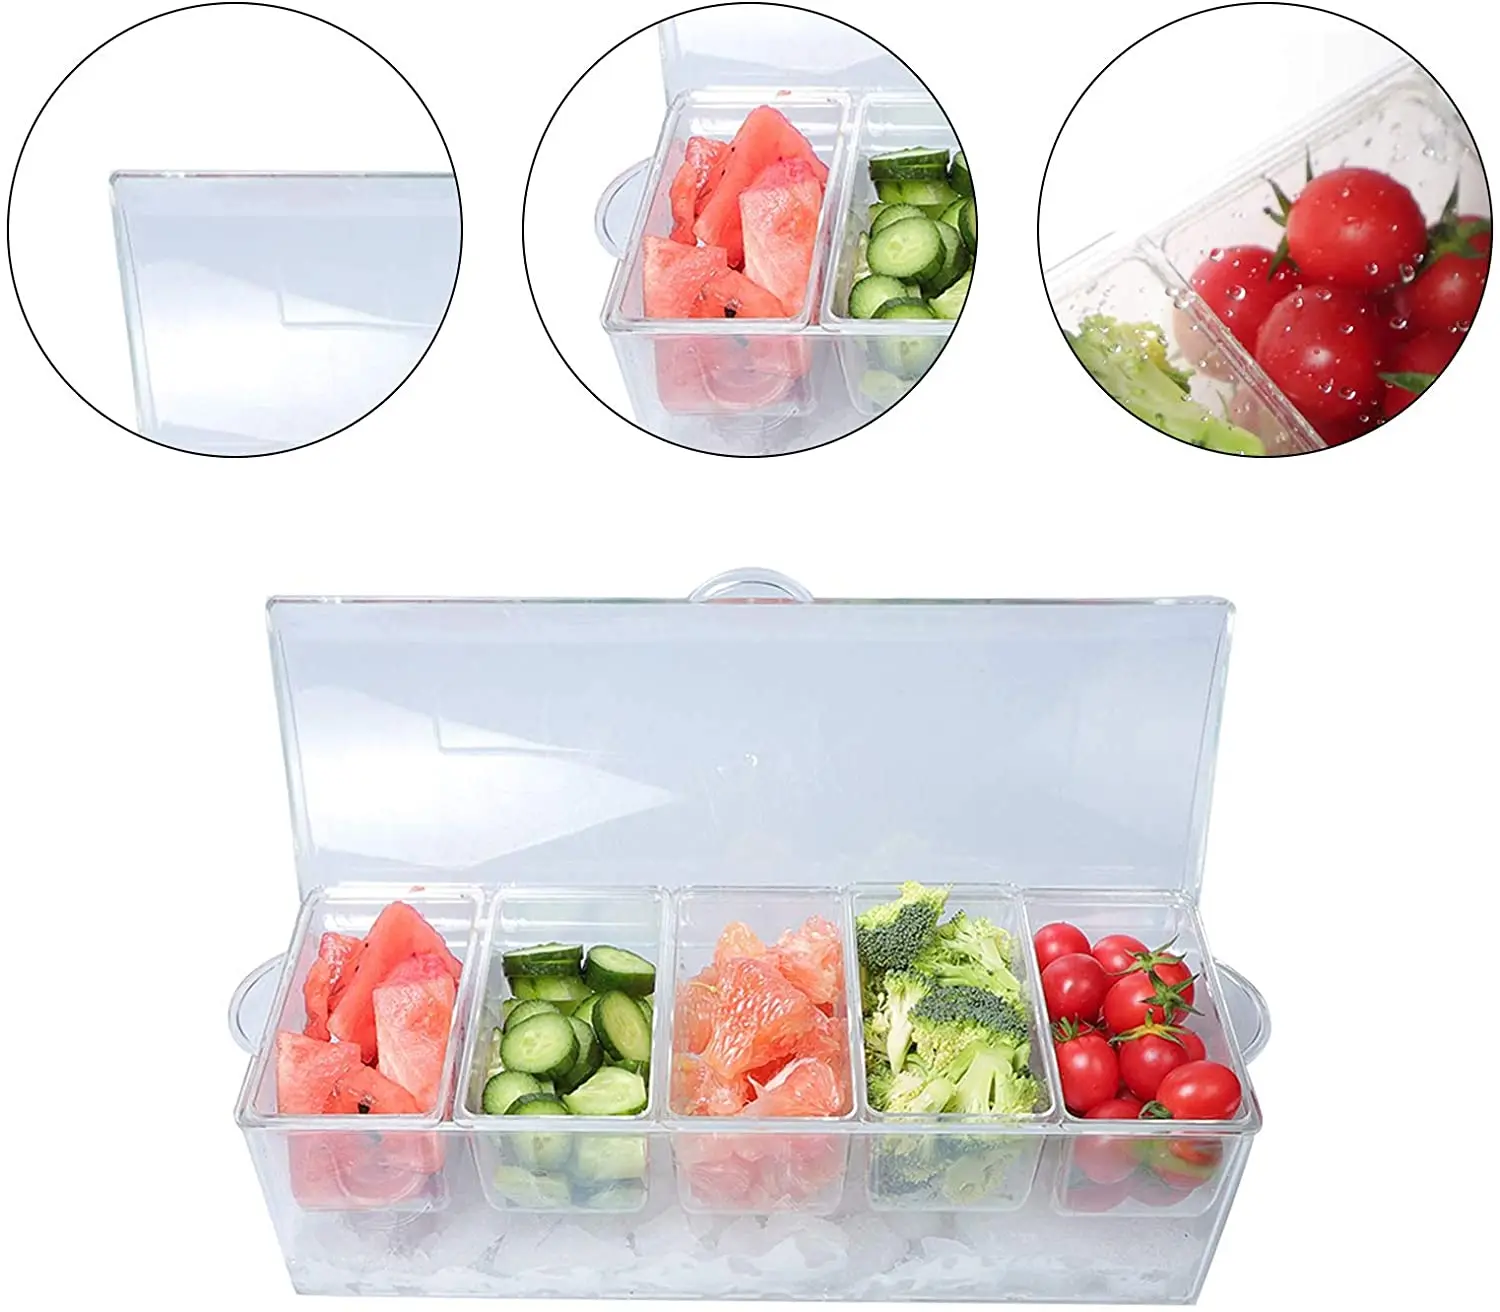 Serving Tray Container With 5 Ice Chilled 5 Compartment Condiment Server Caddy 